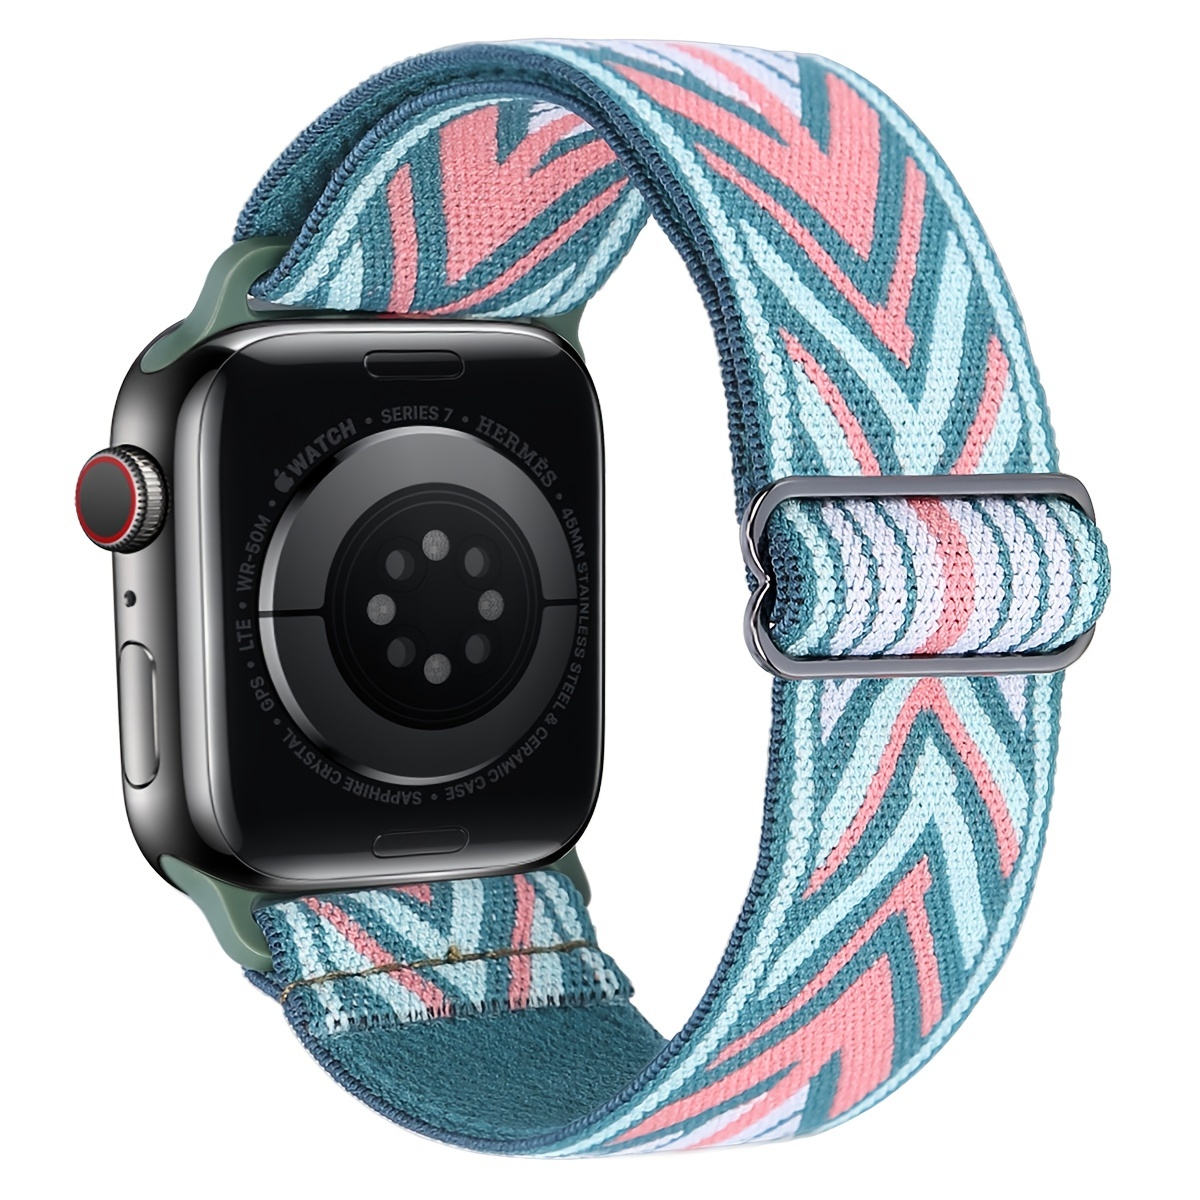  Solo Loop Compatible With Apple Watch Band for 38mm 40mm 41mm  42mm 44mm 45mm iWatch Series 9 8 7 5 6 4 3 2 1 SE, Stretchable Design